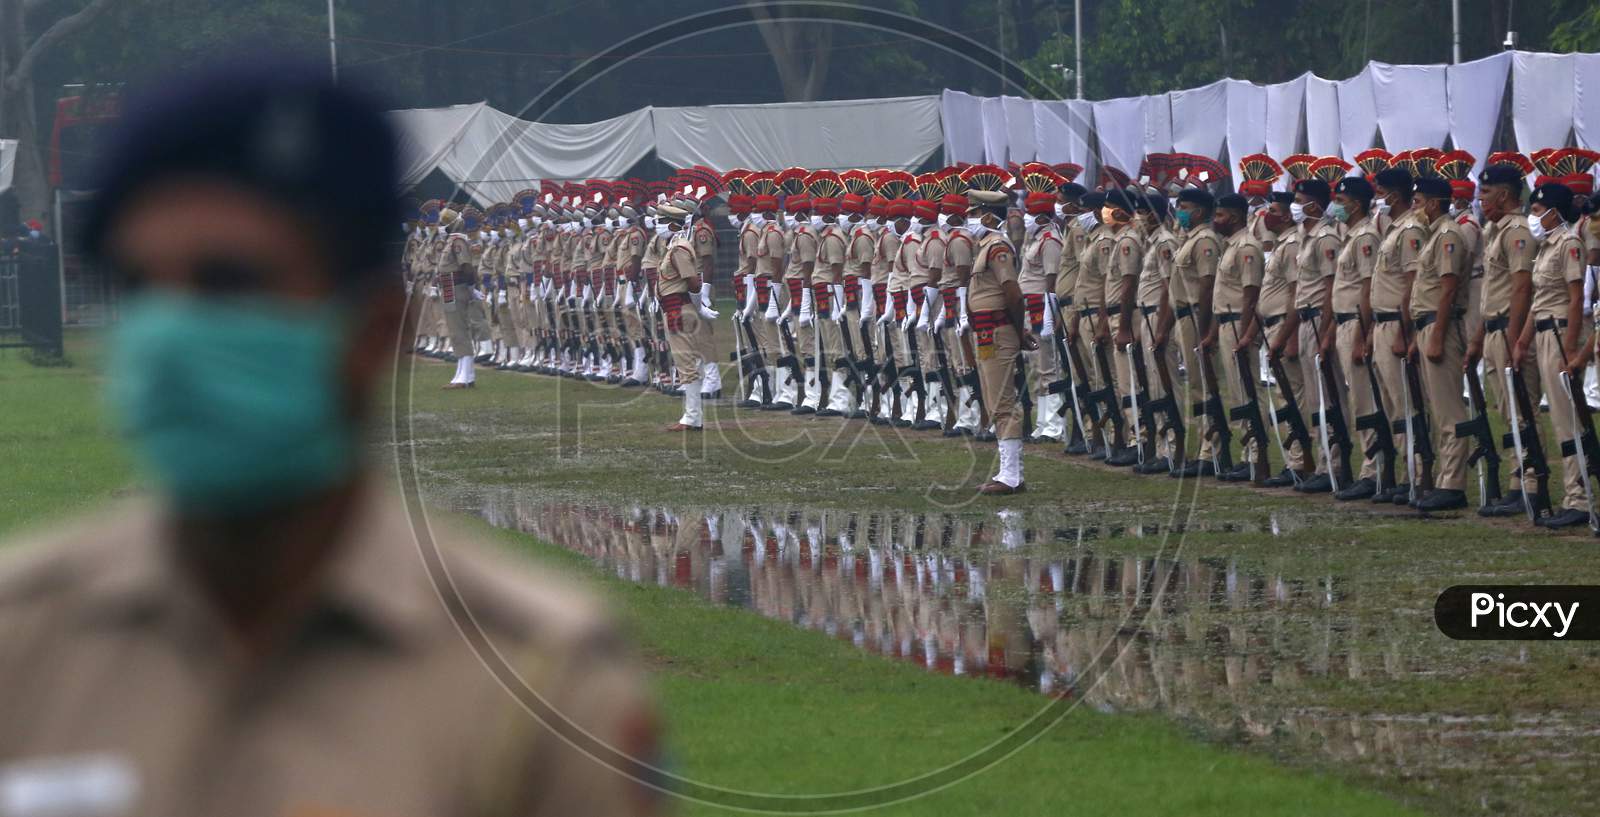 Policemen take part in  full dress rehearsal ahead of India's 74th  Independence day in Chandigarh August 13, 2020